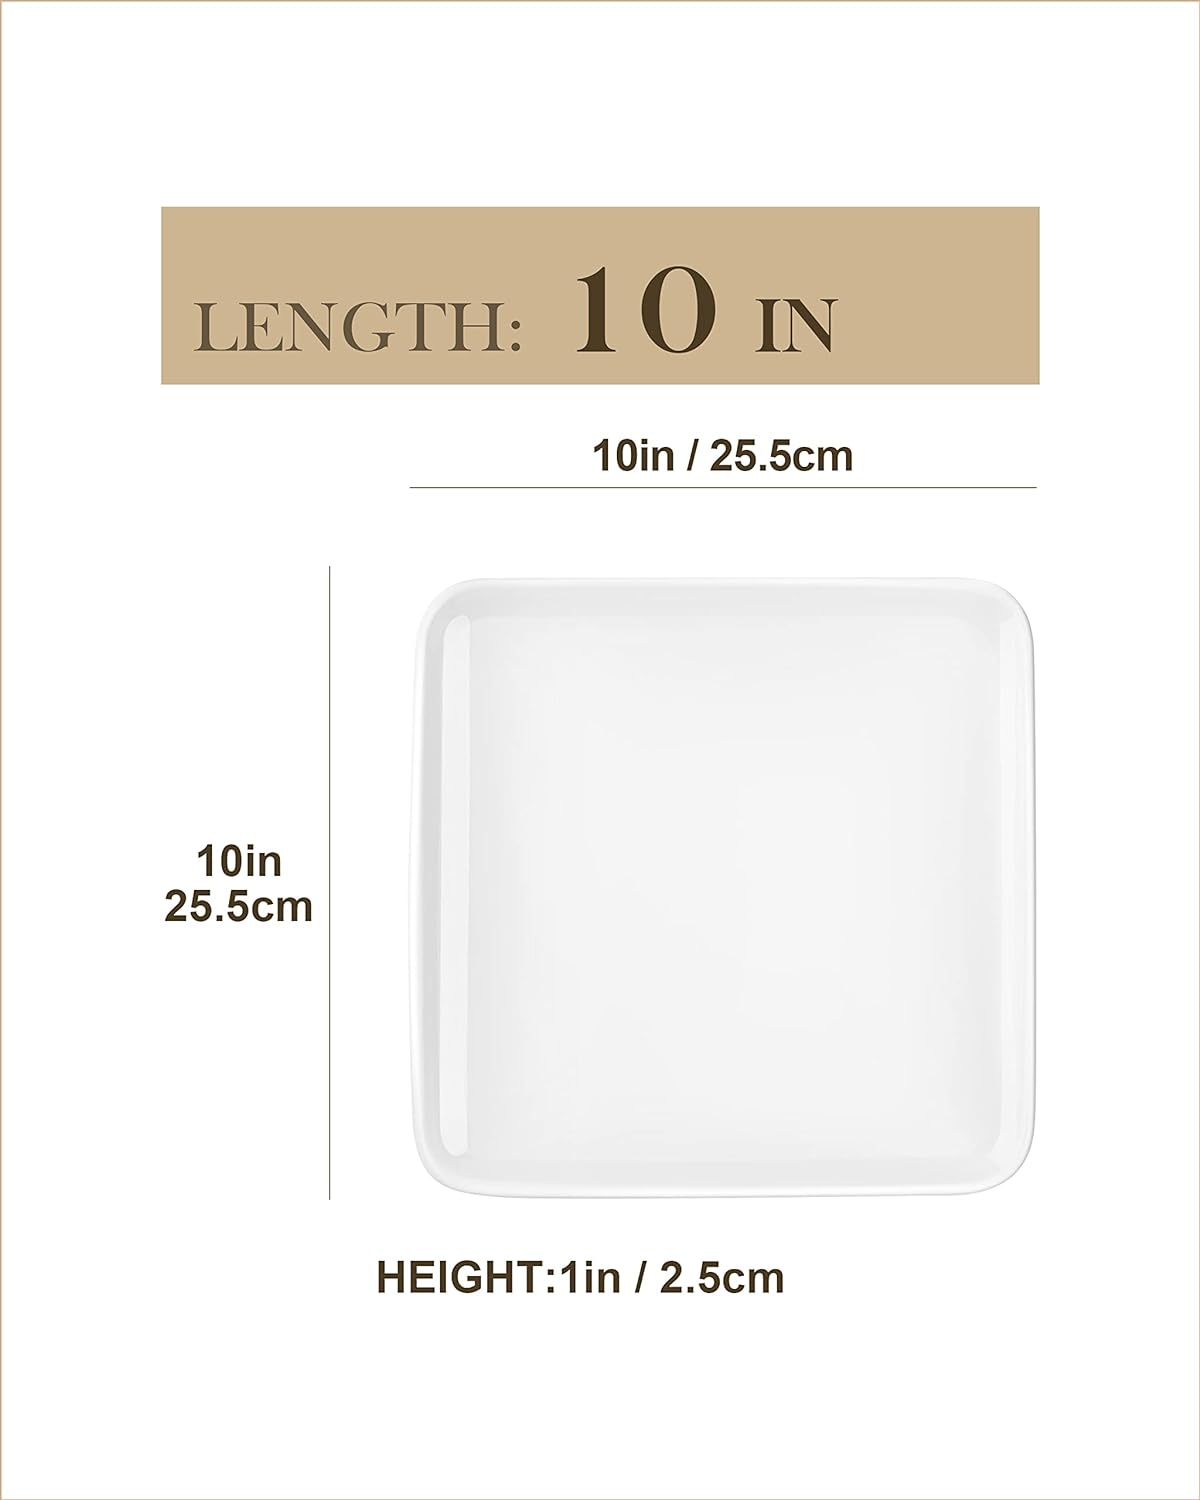 MALACASA Dinner Plate,10 Inch(about 25.4 cm)Ivory White Plate,Square plate 4 Set,Ceramic Plate Suitable for Kitchen Banquet Party Steak Appetizer Salad Pasta,White,Series IVY